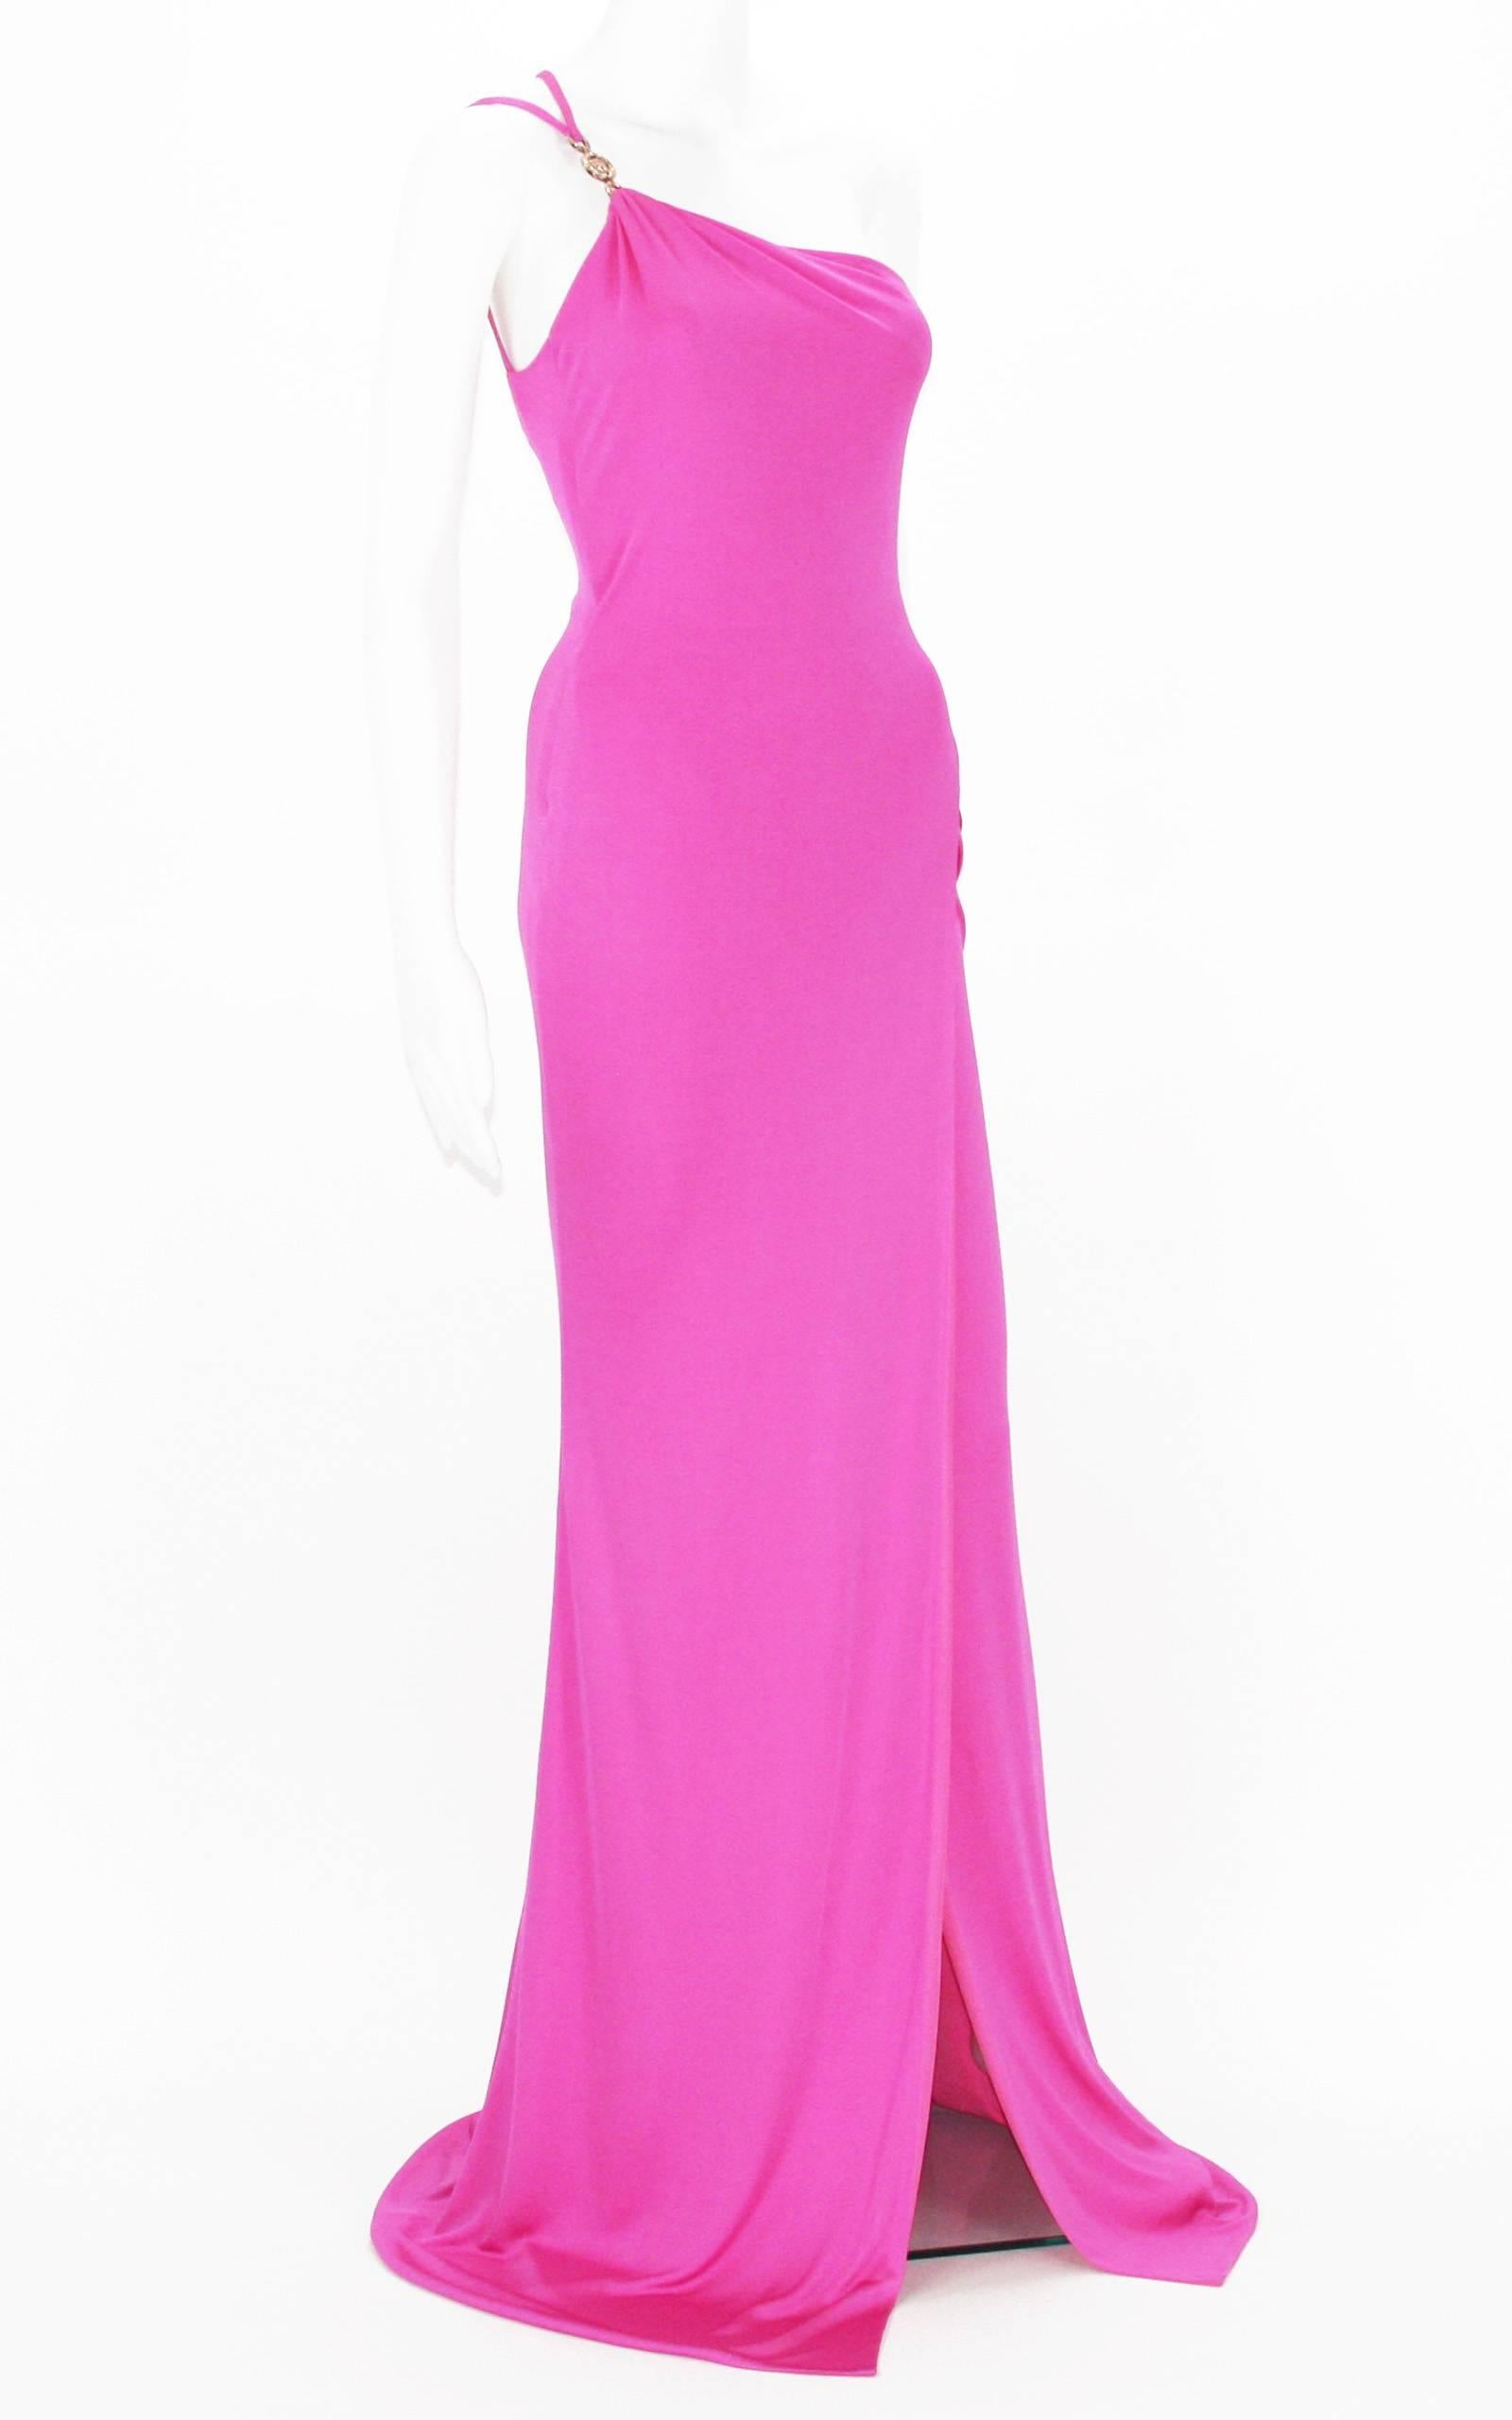 New Versace Hot Pink Jersey One Shoulder Long Dress 
Designer size 38
Gold tone Metal Medusa Logo with Swarovski Crystals
Side High Slit, Side Zip Closure, Double Layered, Stretch.
New with tag.

Listing code: 0417201854580222958